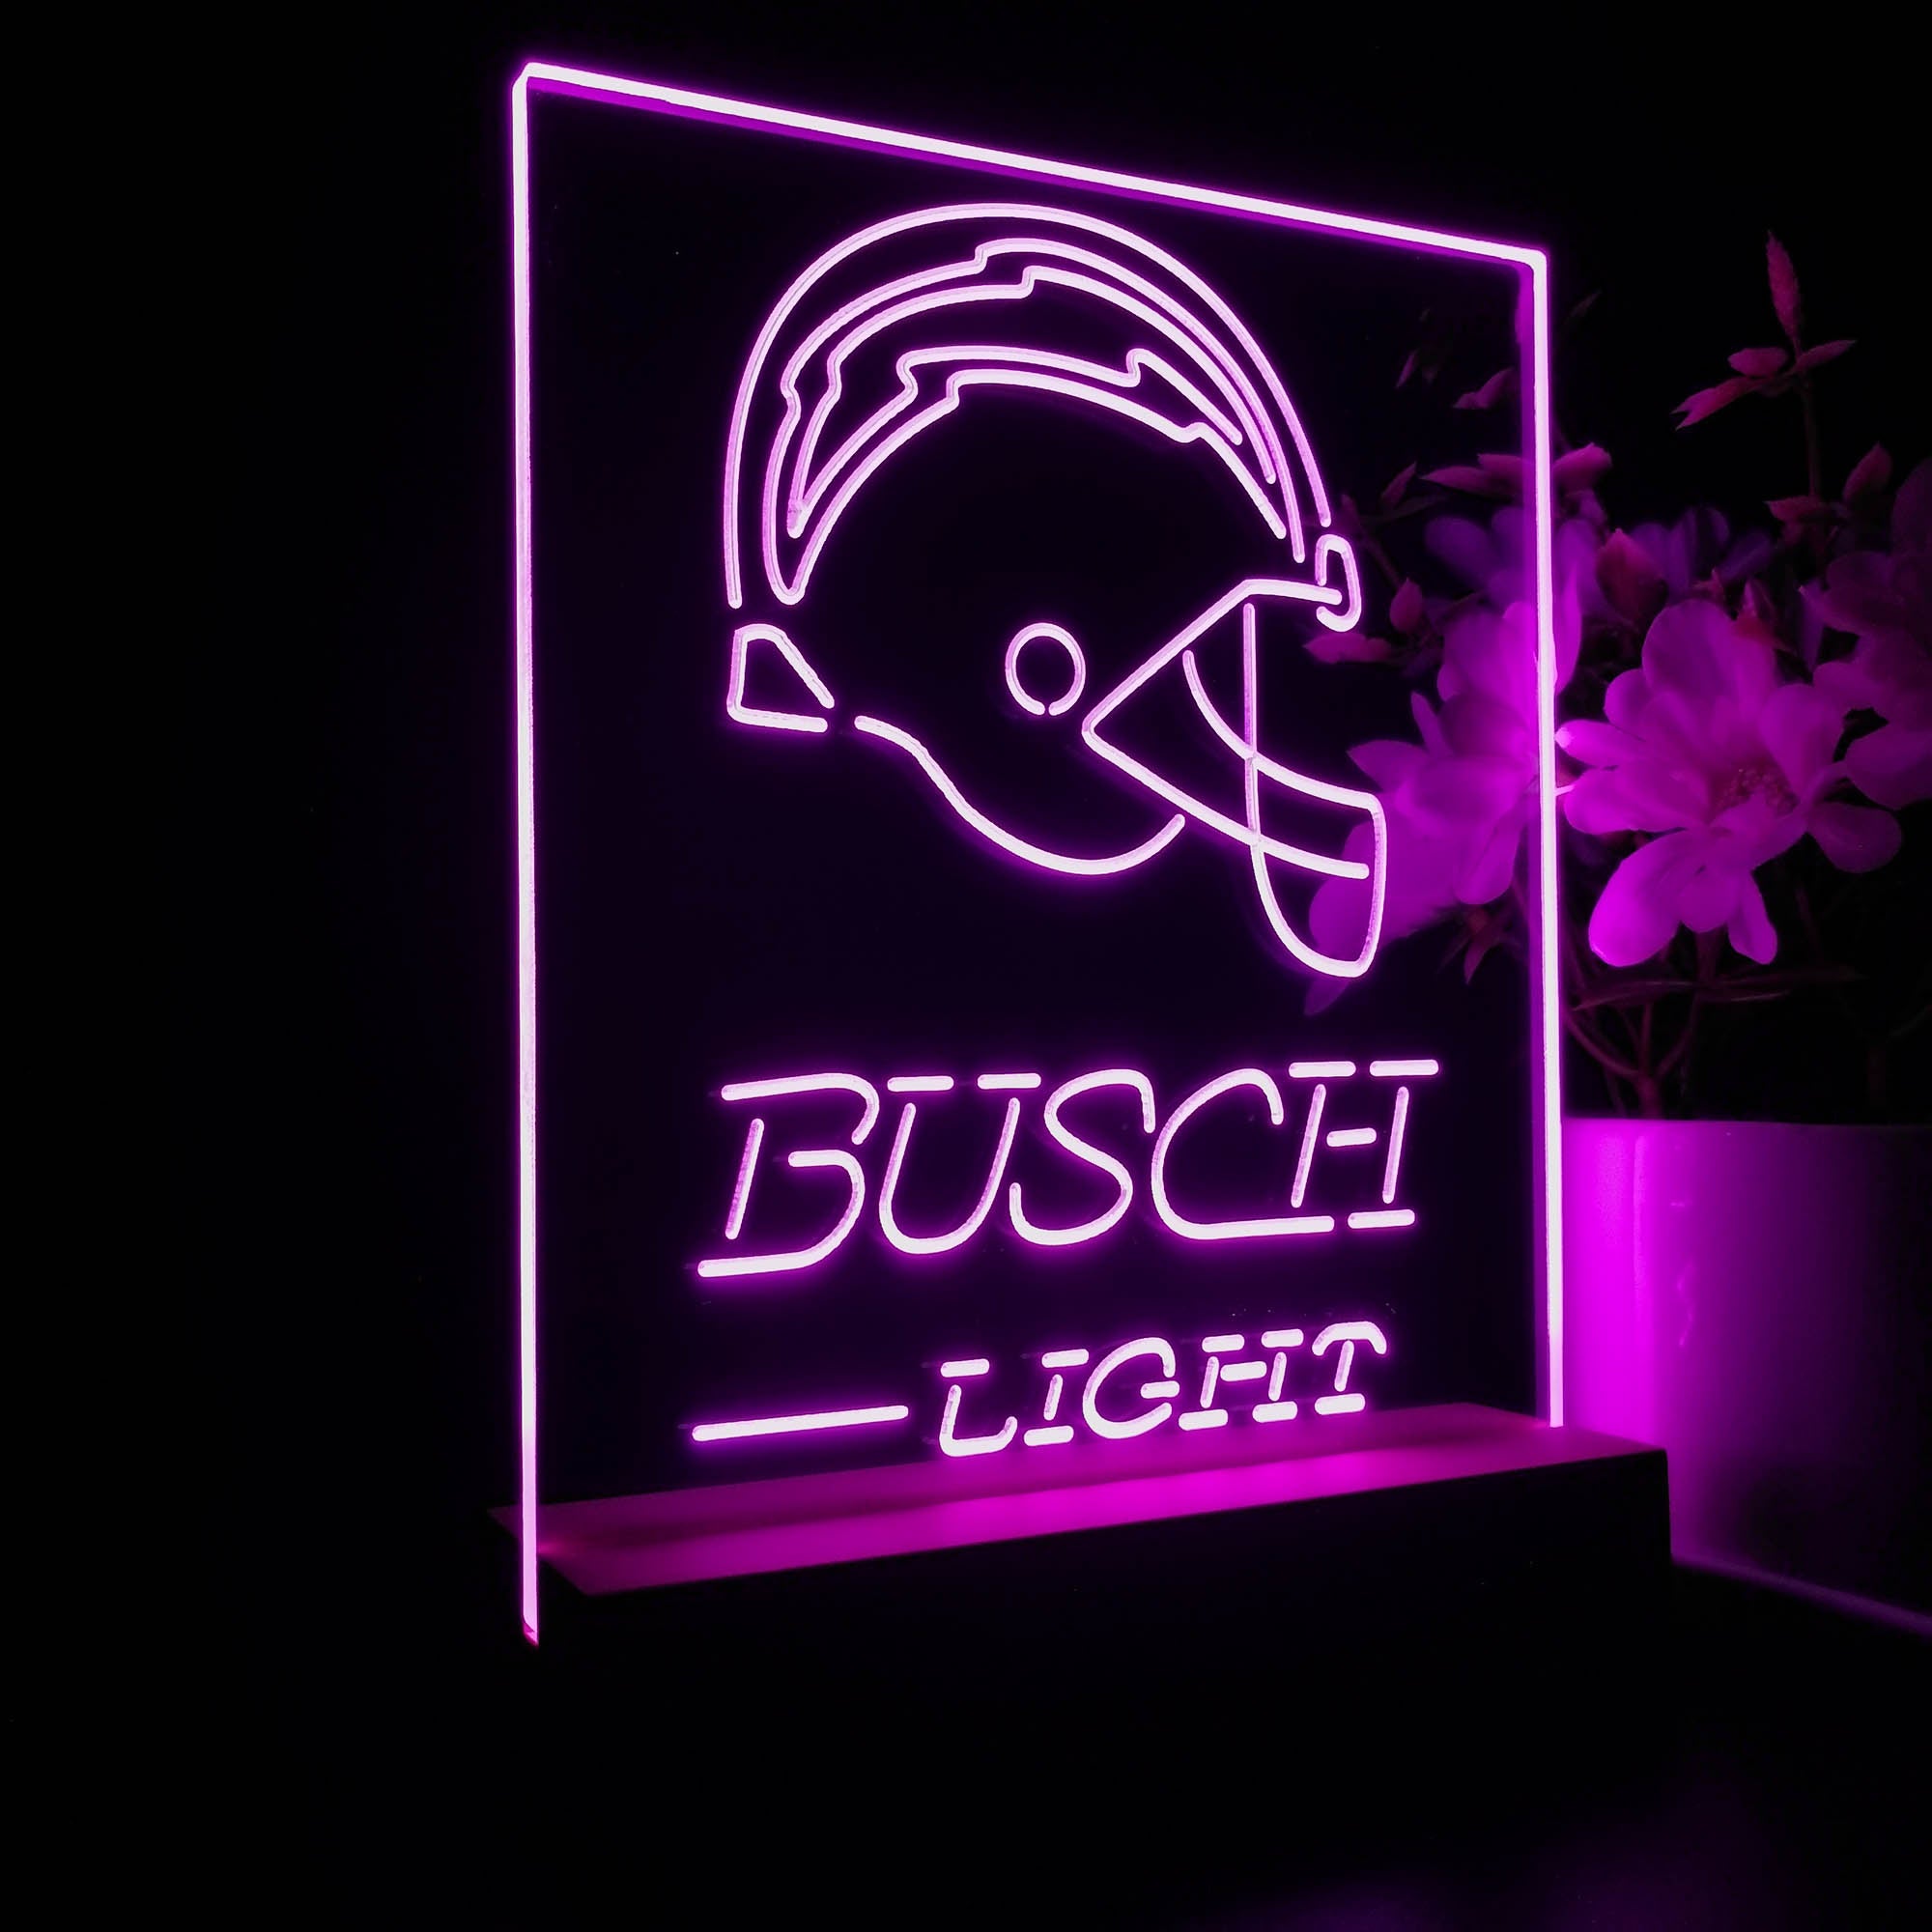 San Diego Chargers Busch Light 3D LED Optical Illusion Sport Team Night Light